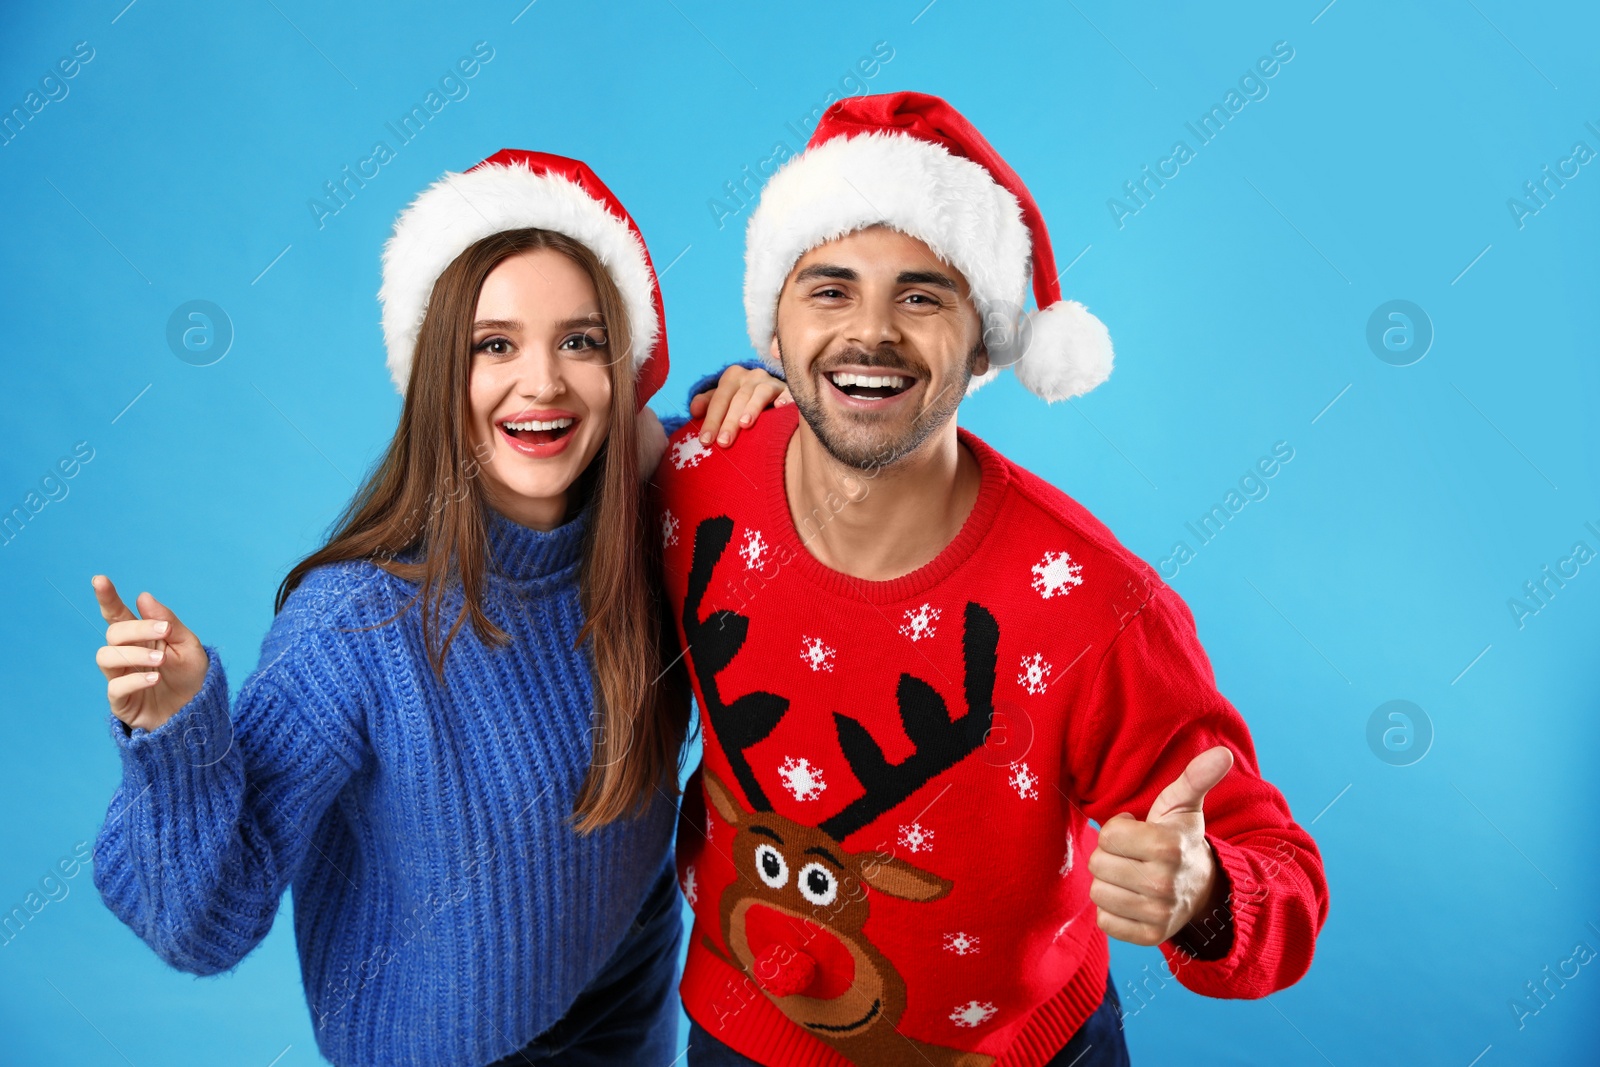 Photo of Couple wearing Christmas sweaters and Santa hats on blue background